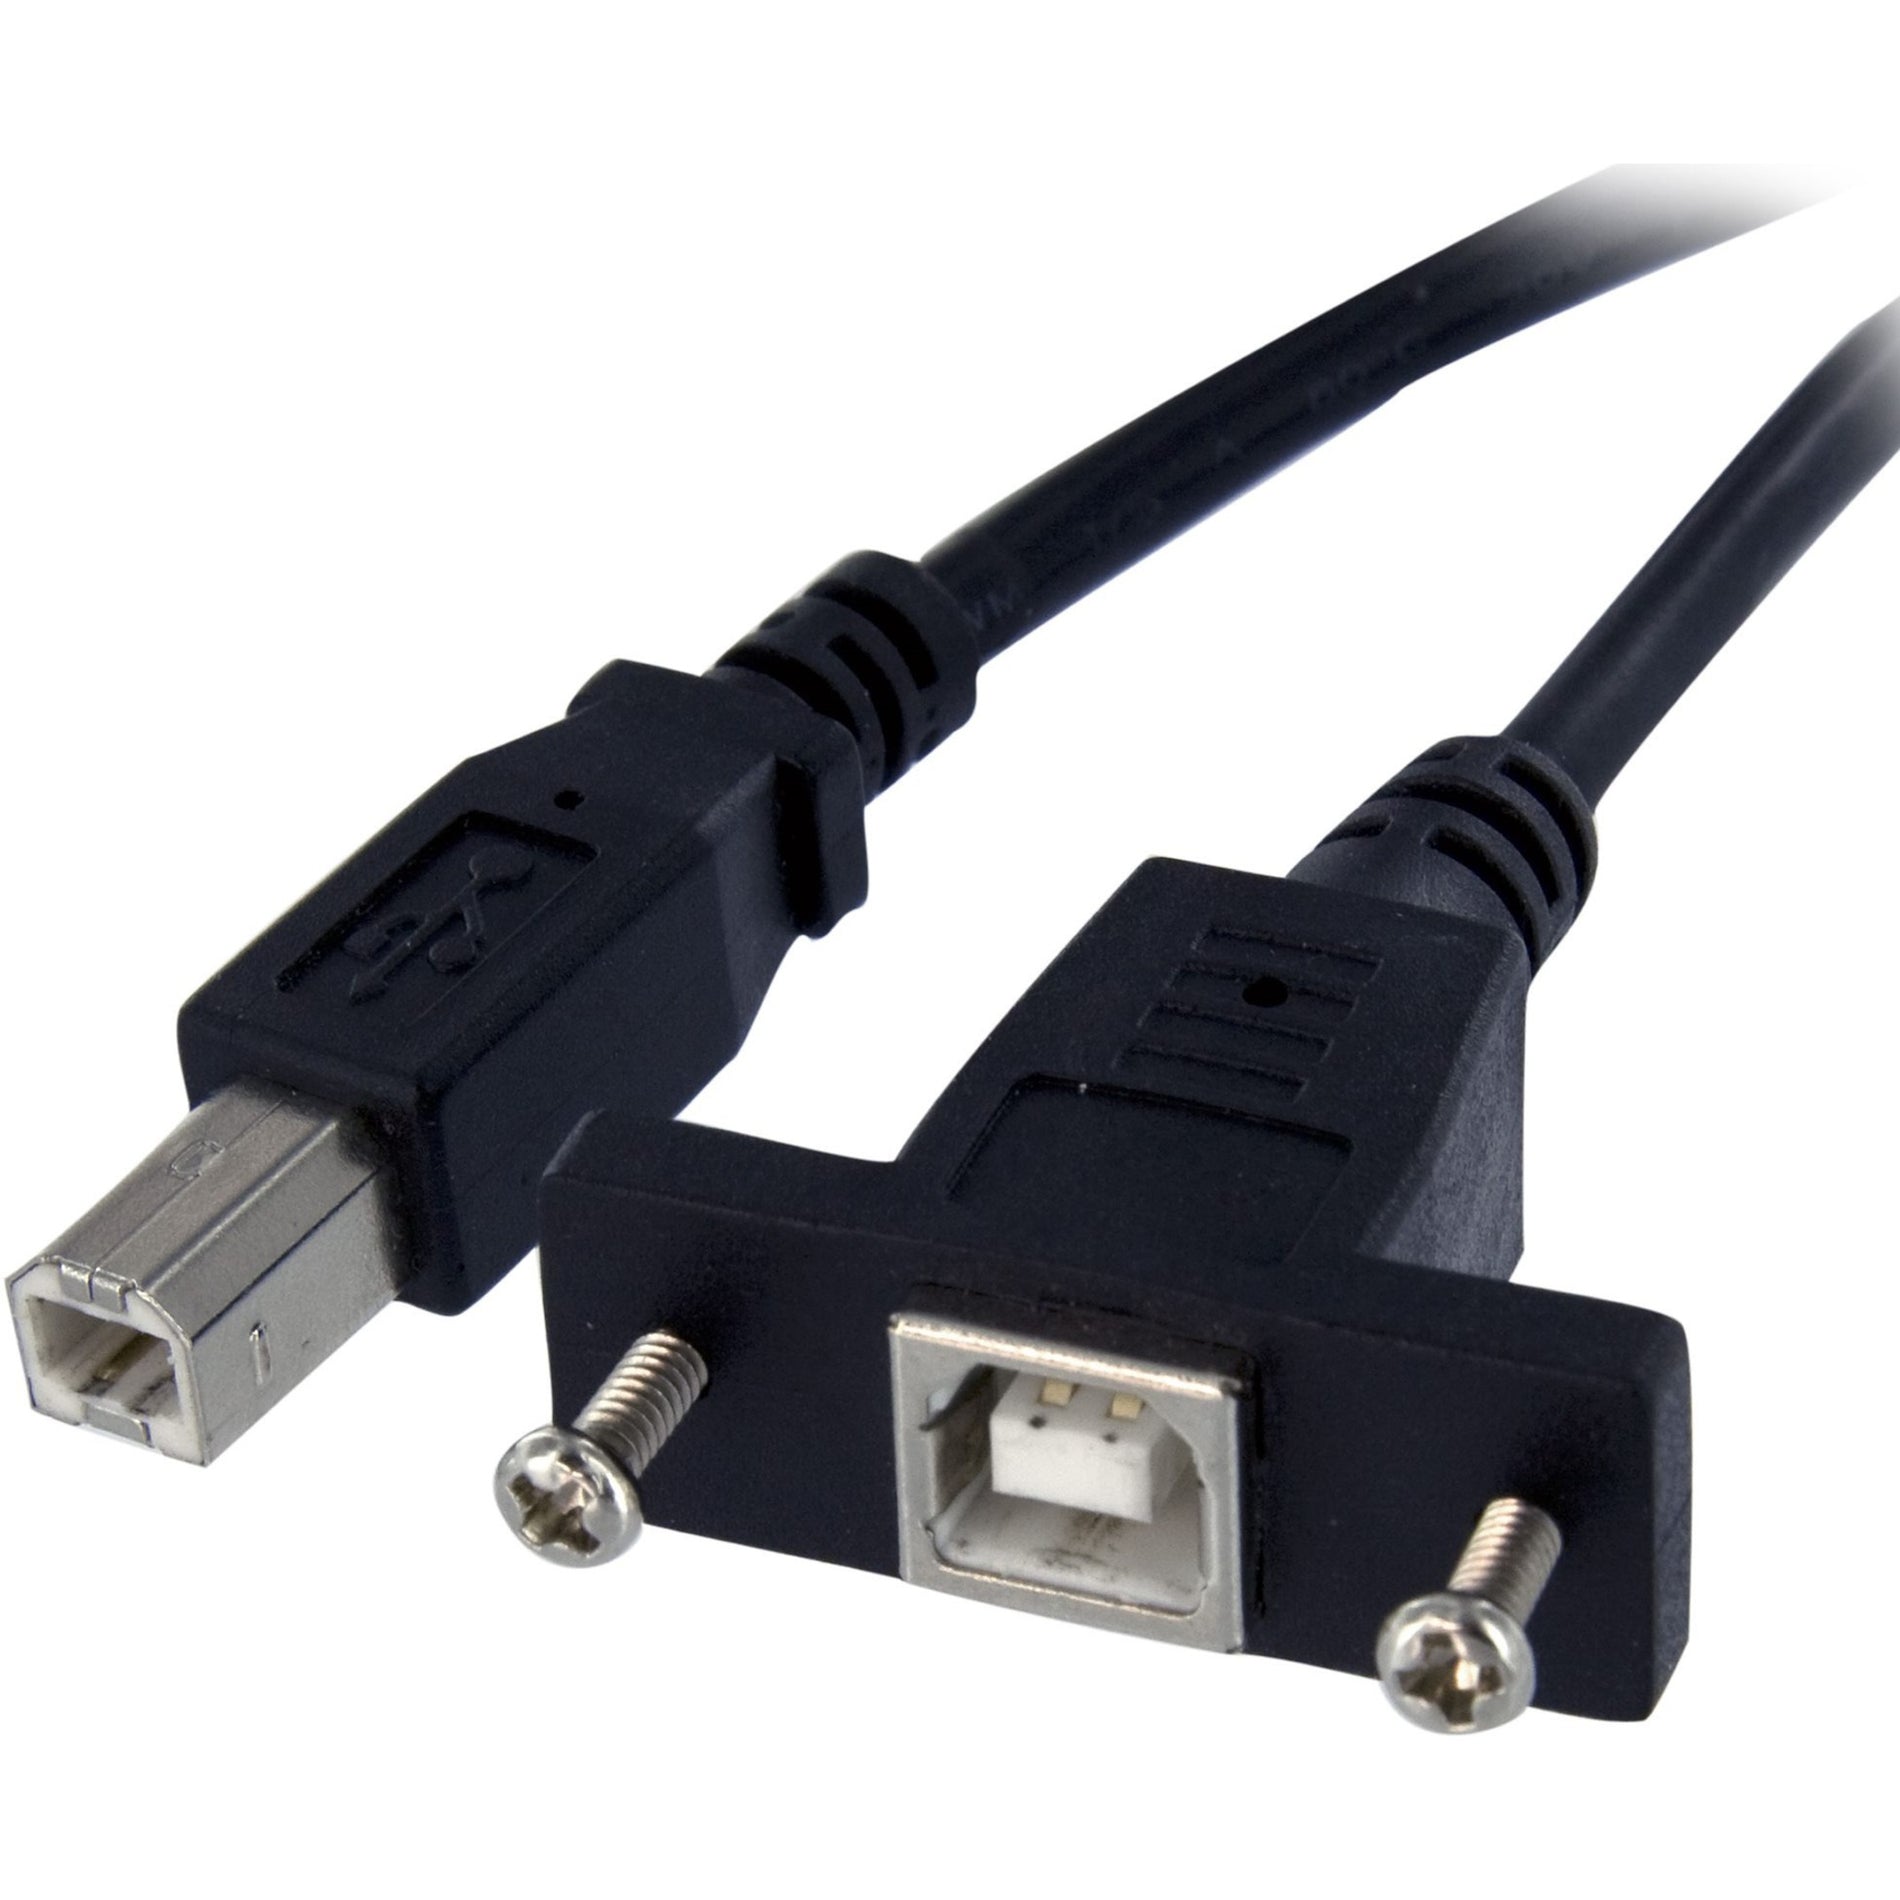 StarTech.com USBPNLBFBM3 3 ft Panel Mount USB Cable B to B - F/M, Copper Conductor, Shielded, 24/28 AWG, Black